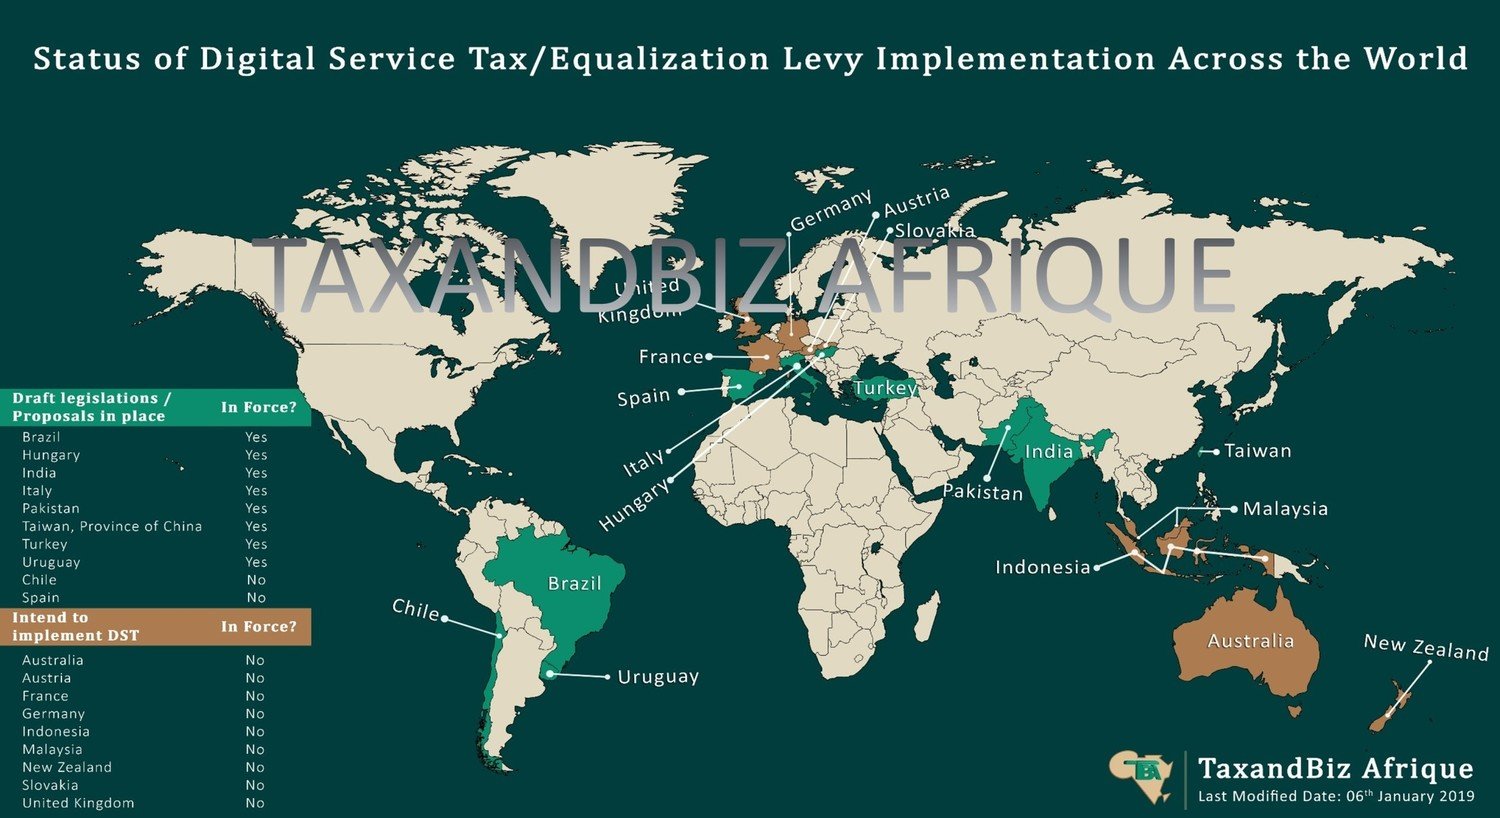 Map on Status of Digital Service Tax Implementation